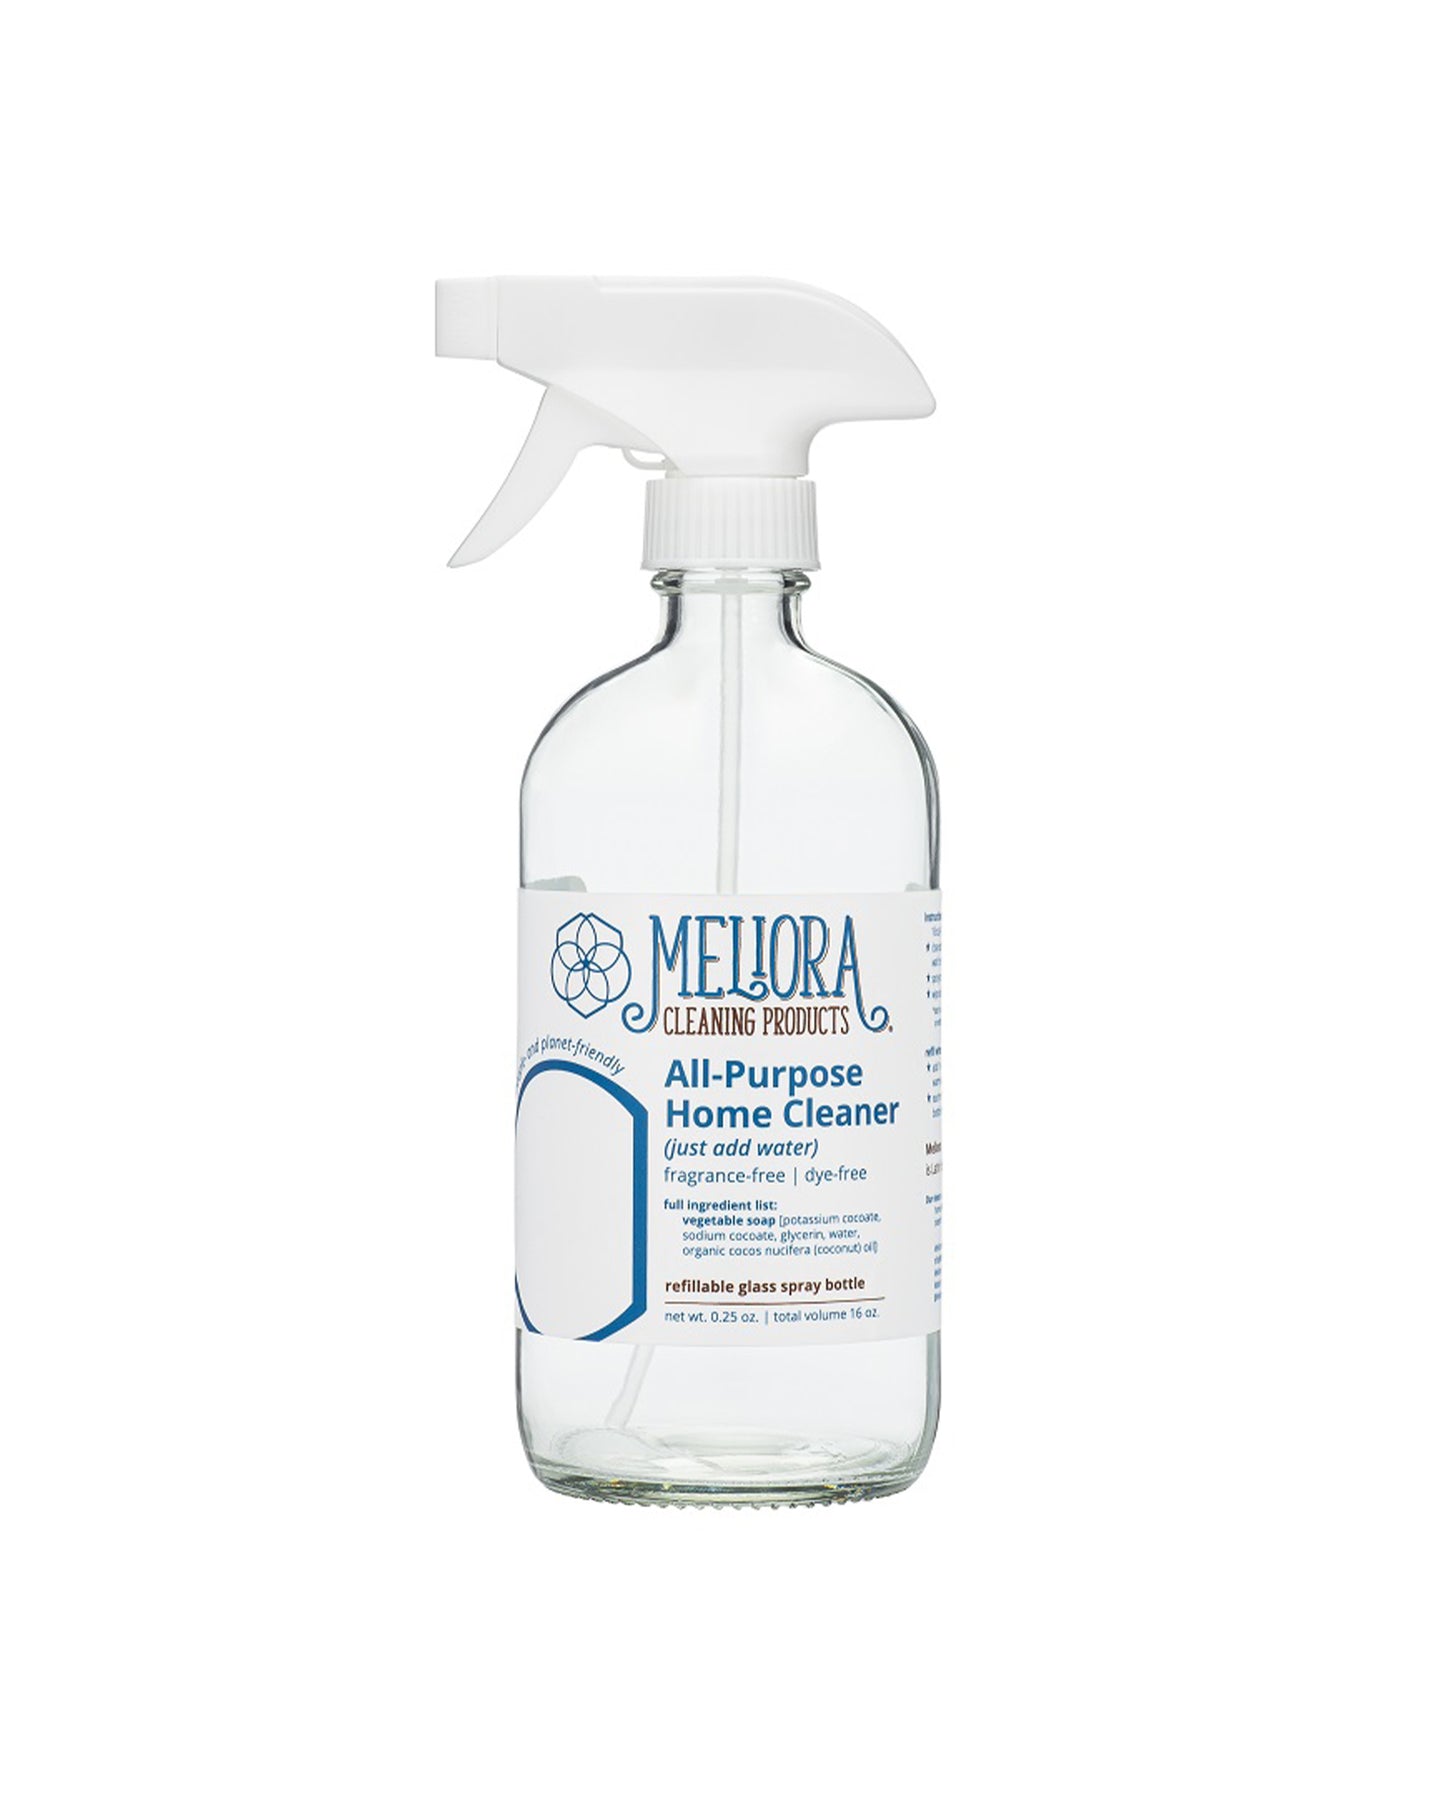 Meliora Cleaning Products All Purpose Home Cleaner, Unscented 16 oz Bottle